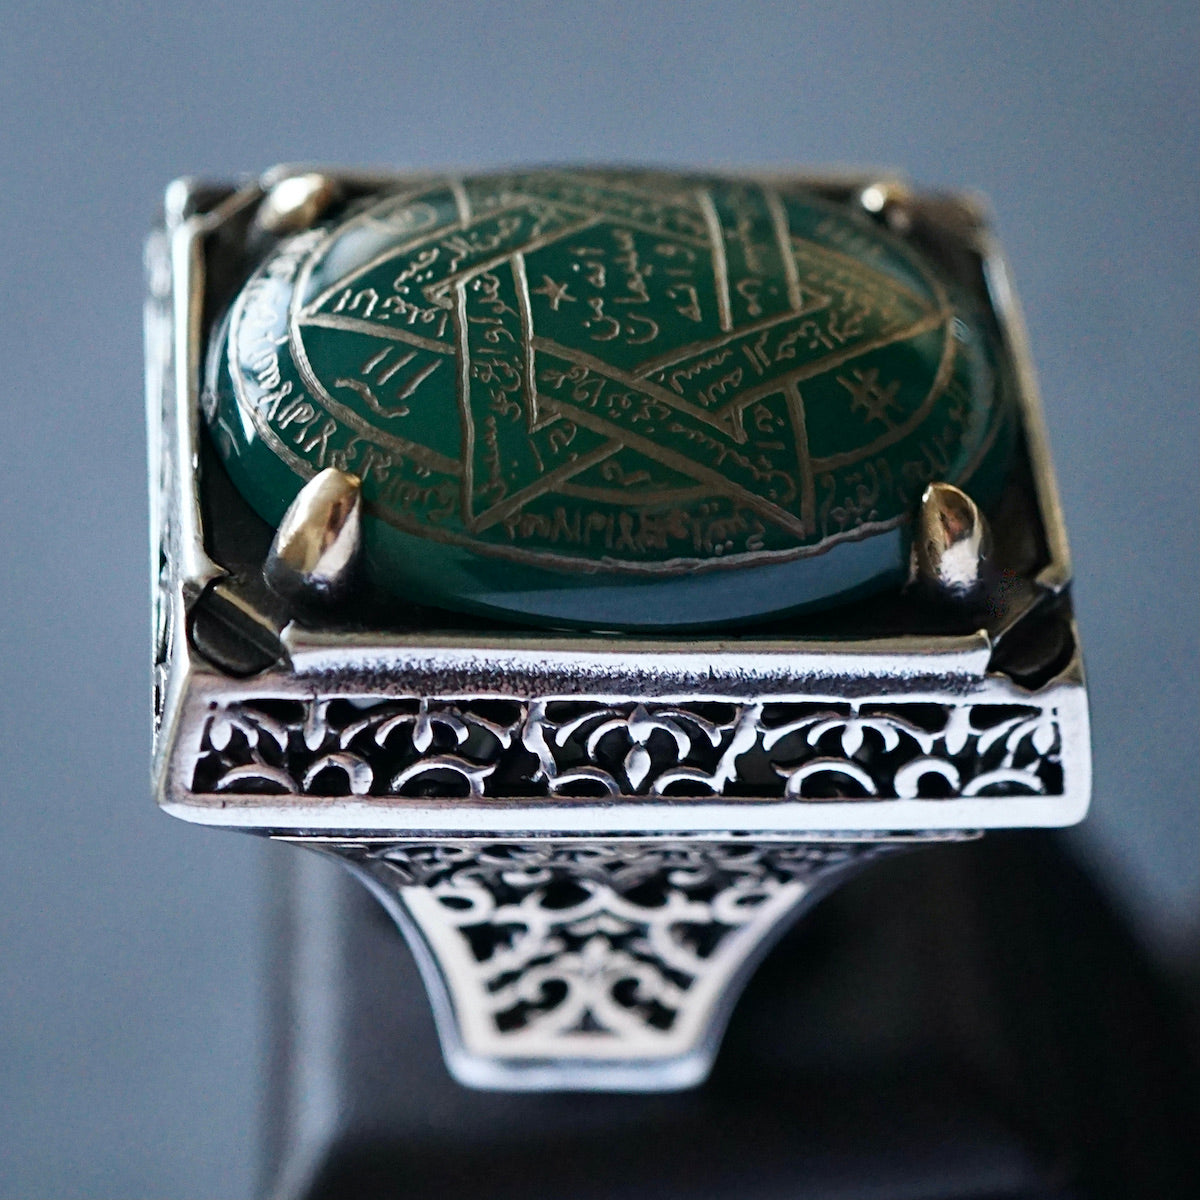 Ring 925 Sterling Silver Seal of Solomon Hand-engraved green Agate natural gemstone Unique Islamic Talisman Amulet